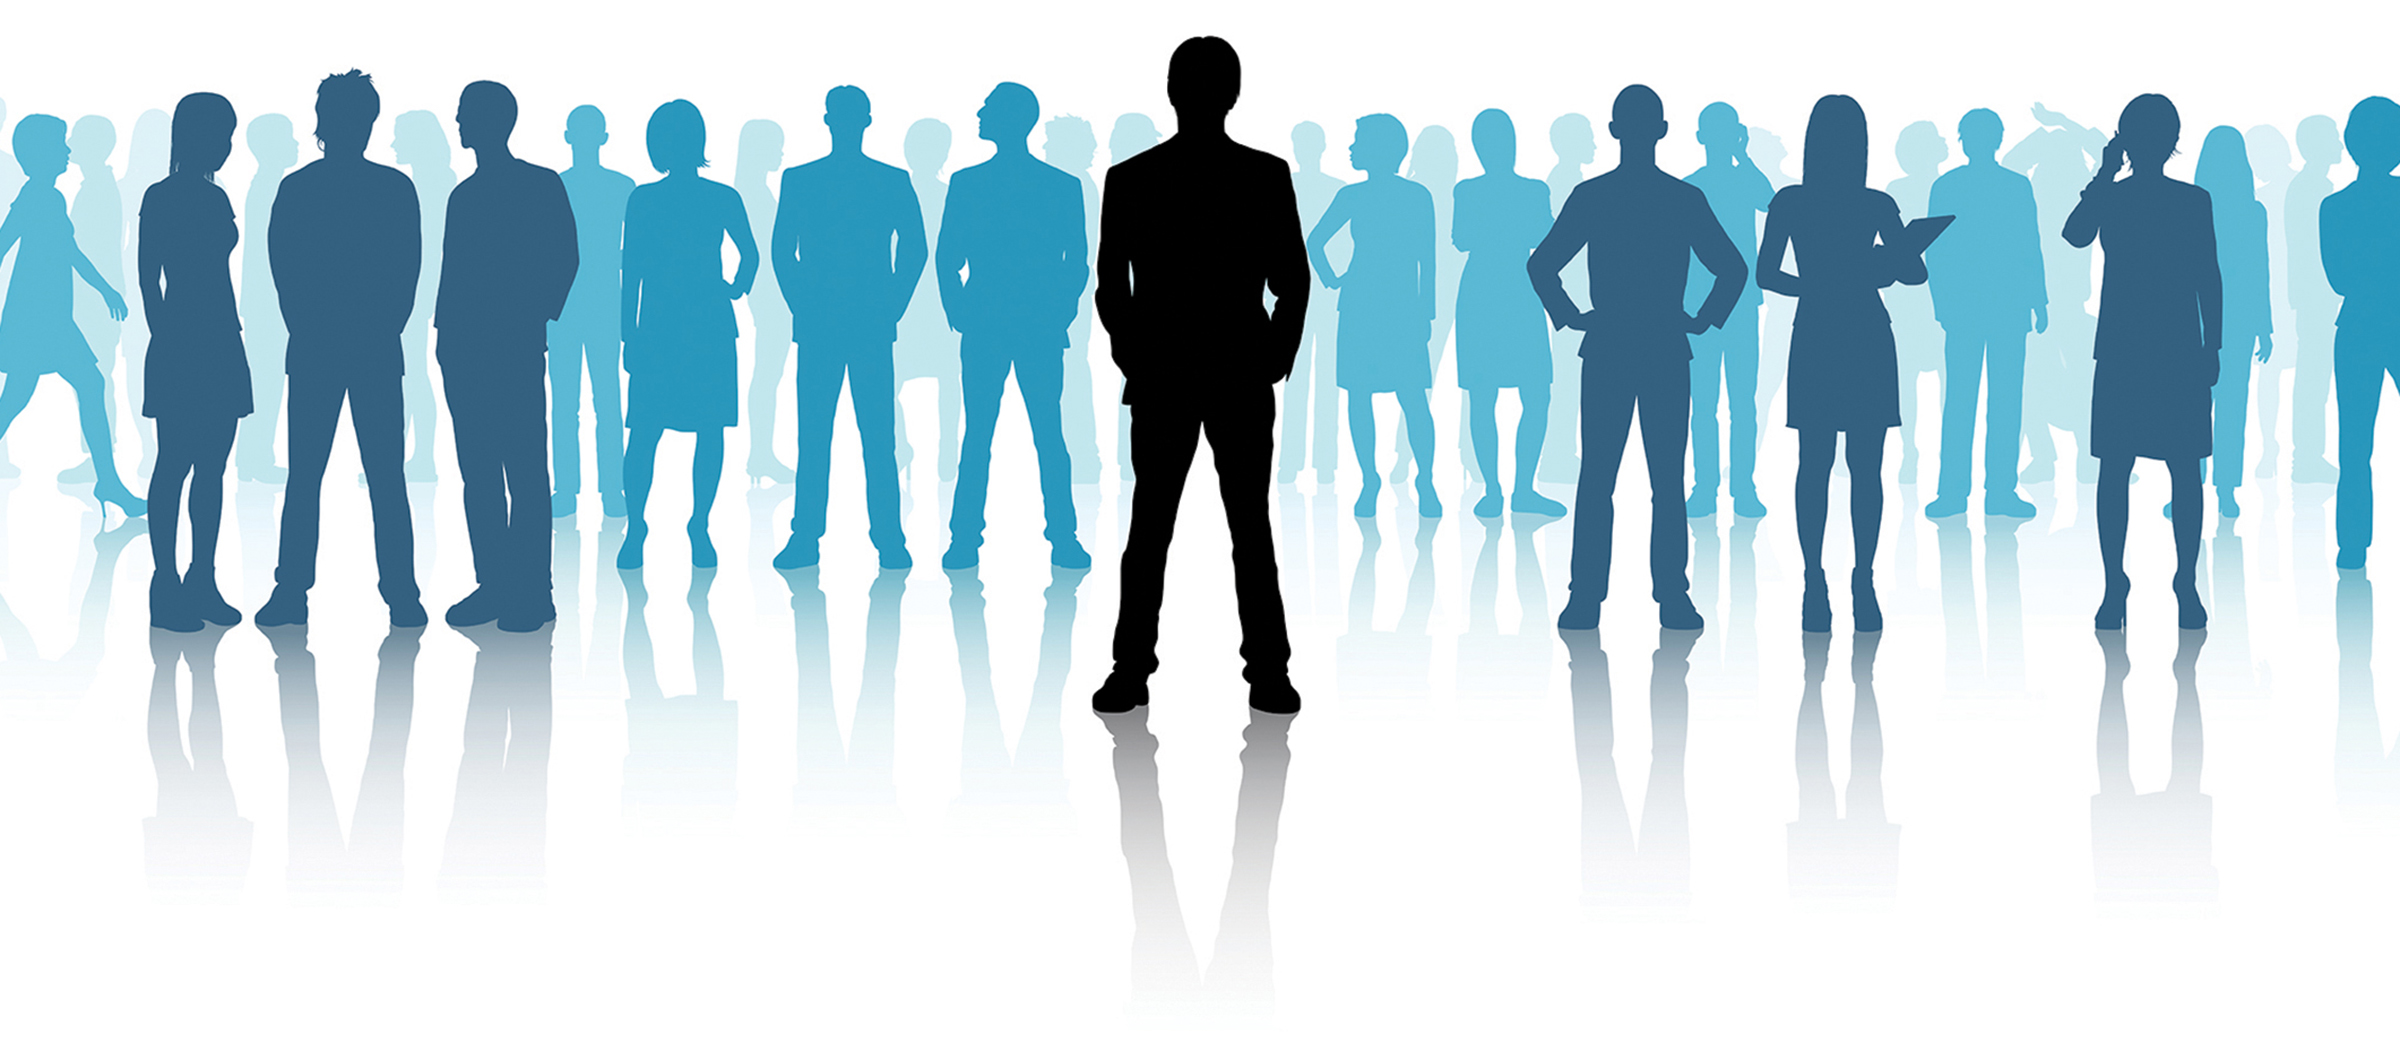 Illustration of a line of people sillouetted on white background